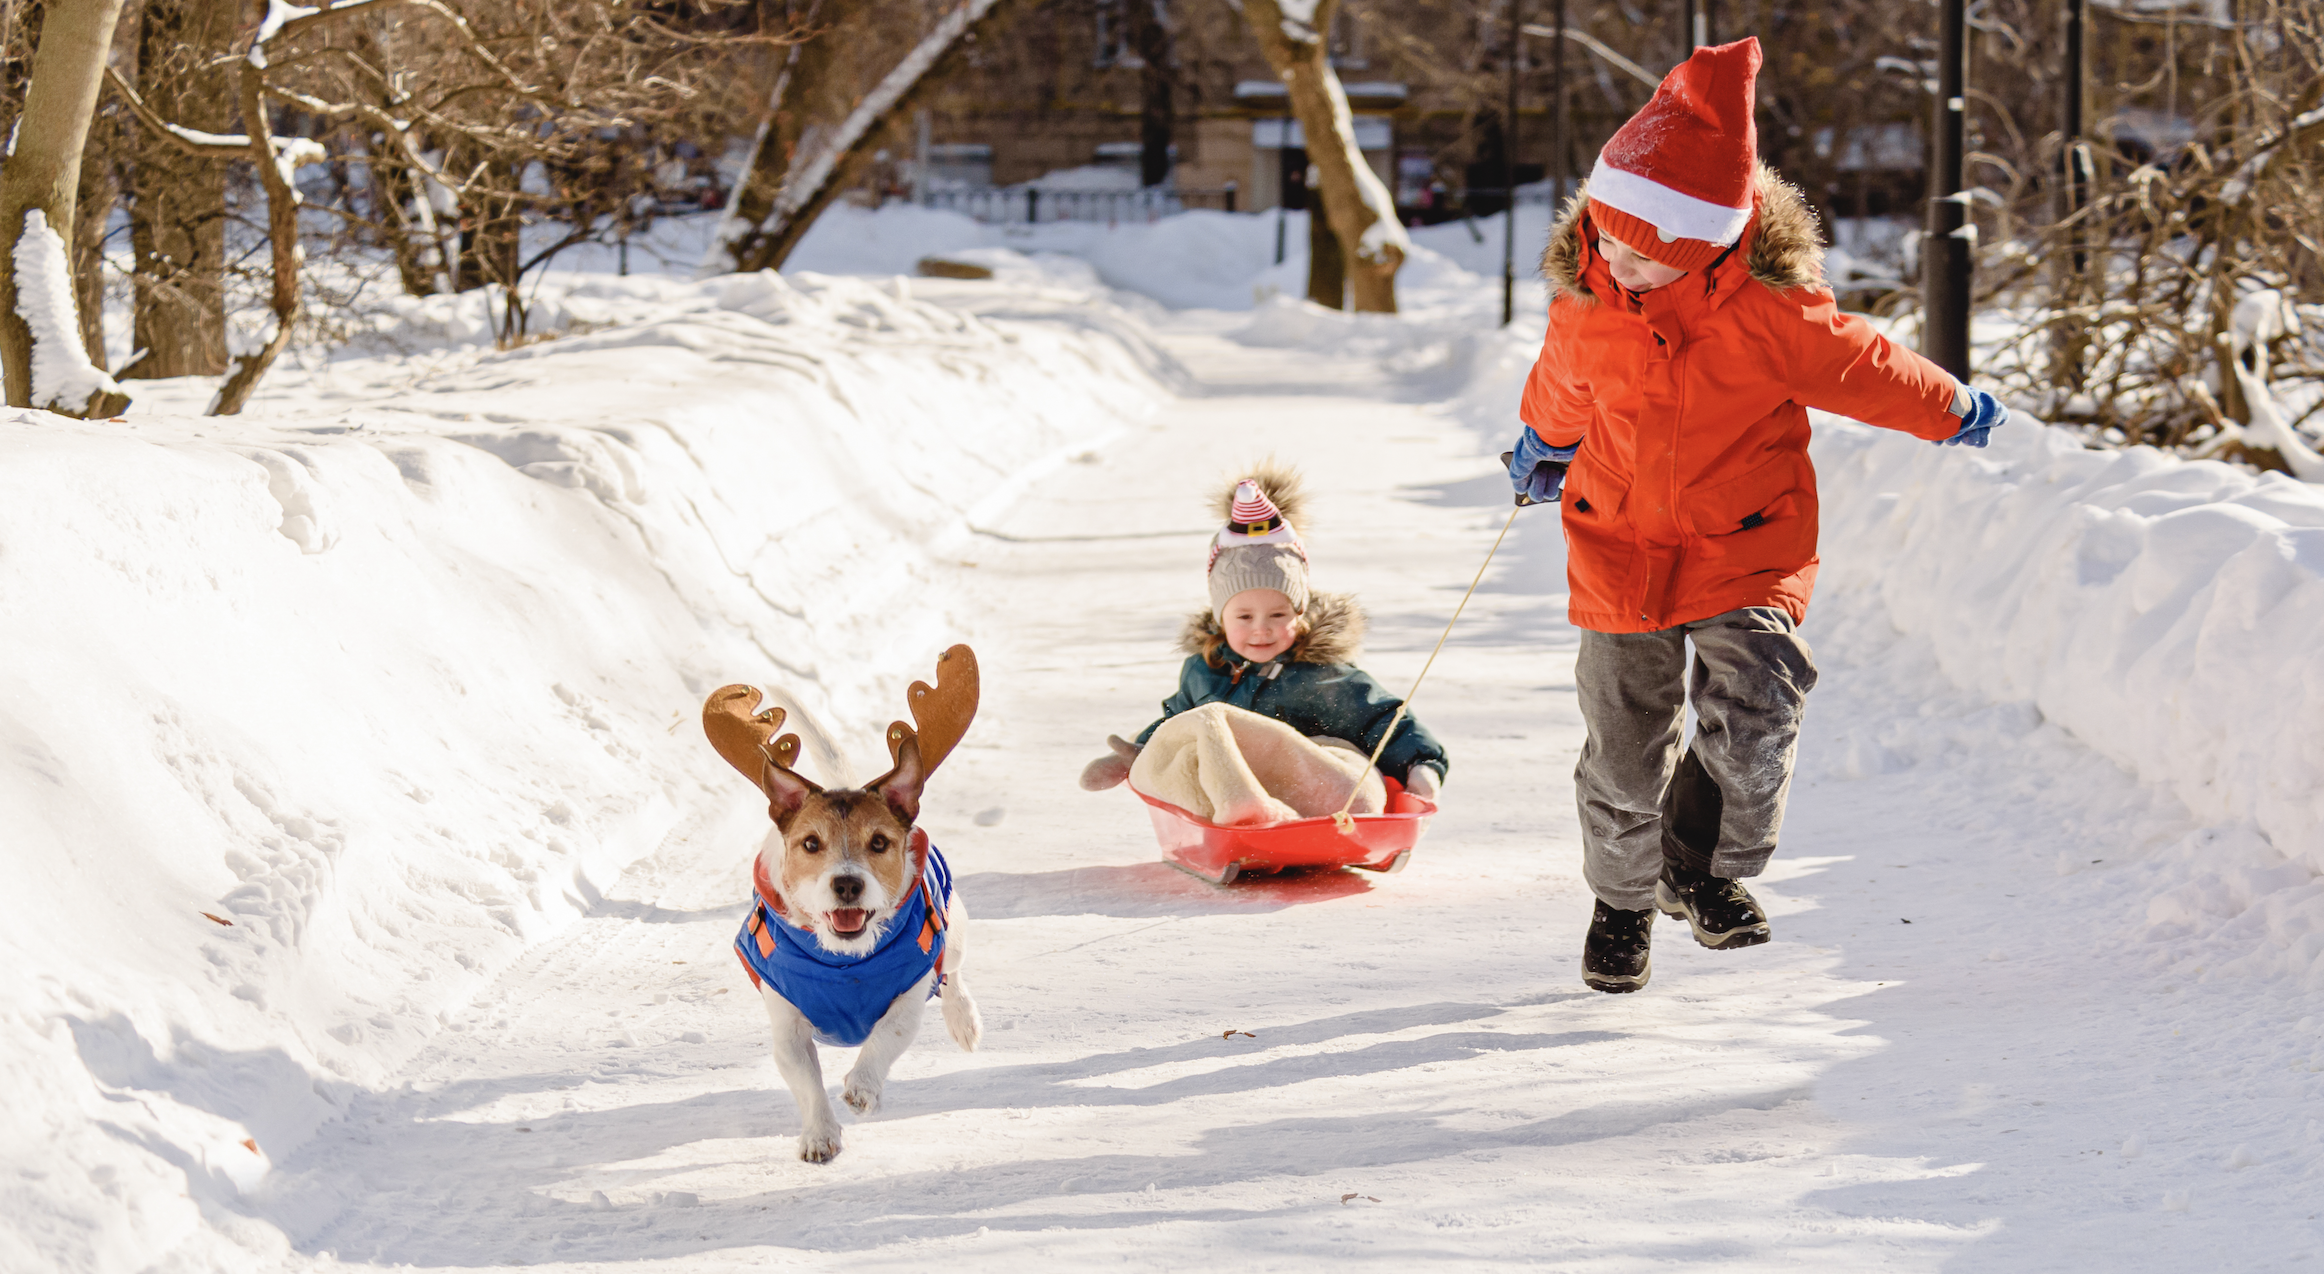 12 Best Snow Toys for Kids in 2020: Snow Day Activities